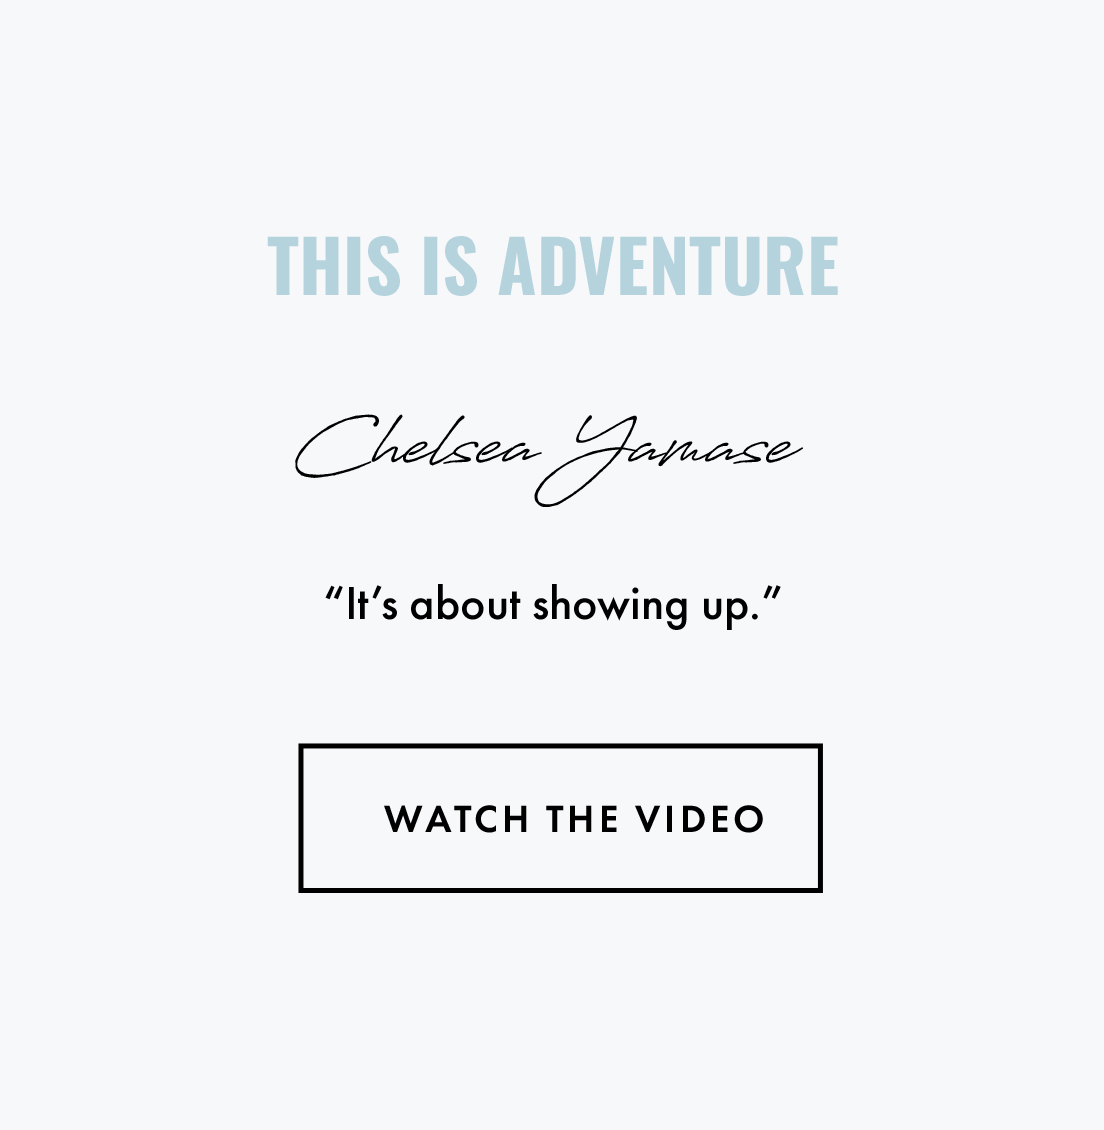 This is Adventure Chelsea Yamase. "It's about showing up." Watch the video